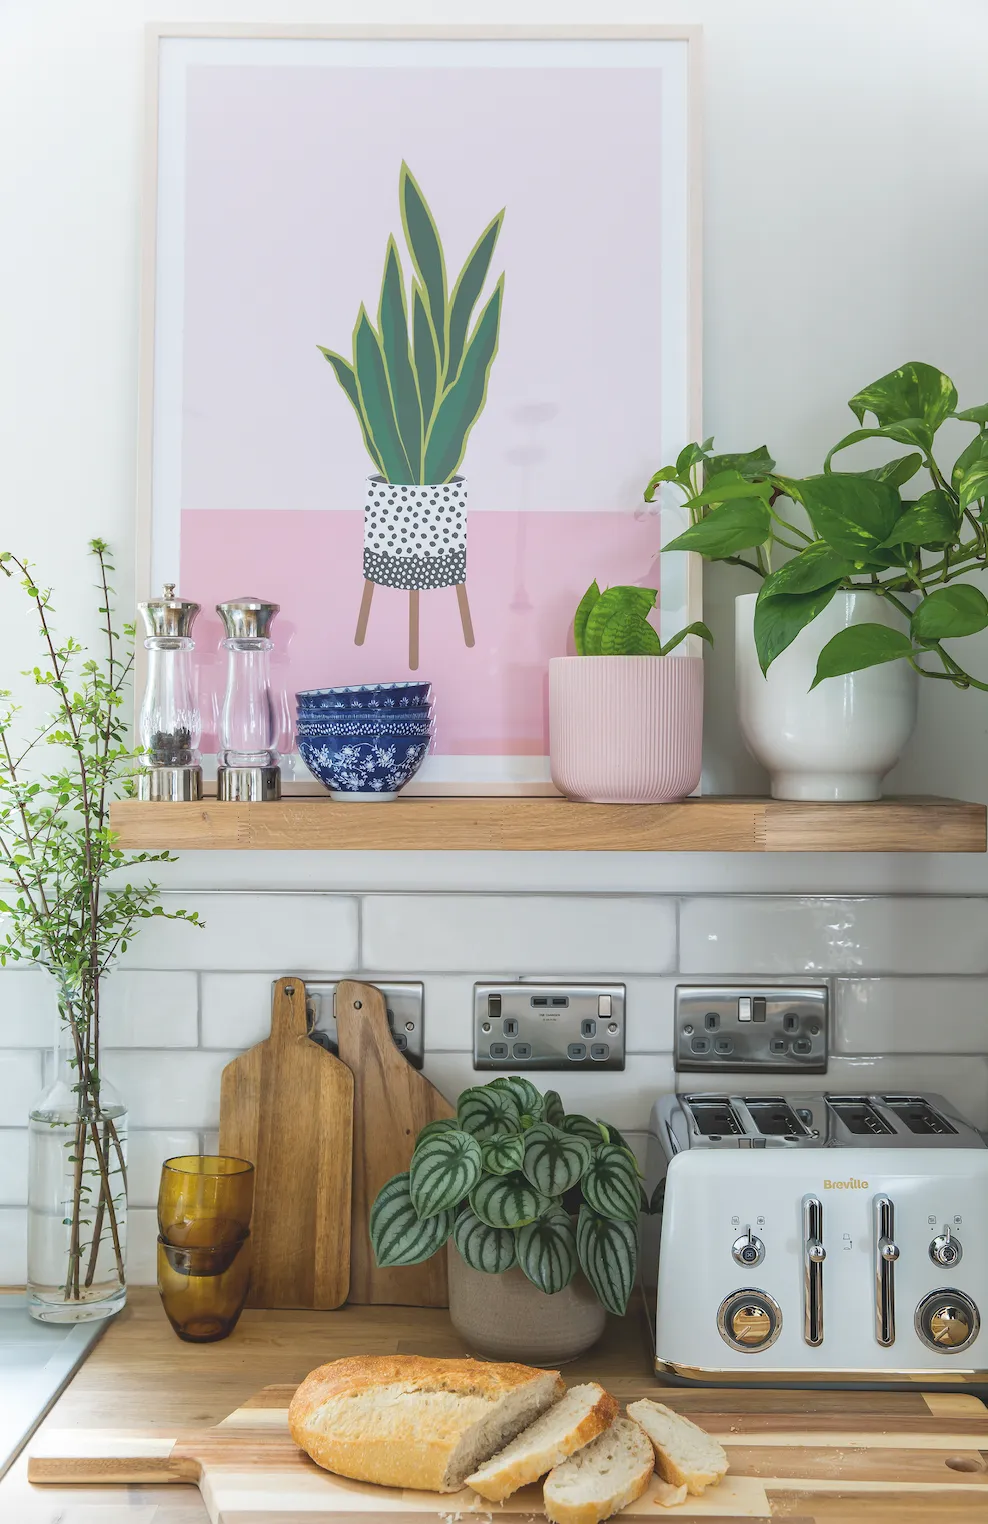 Nadia included open shelving in her scheme as well as wall units so she’d have somewhere to display plants and accessories to jazz up her Scandi scheme